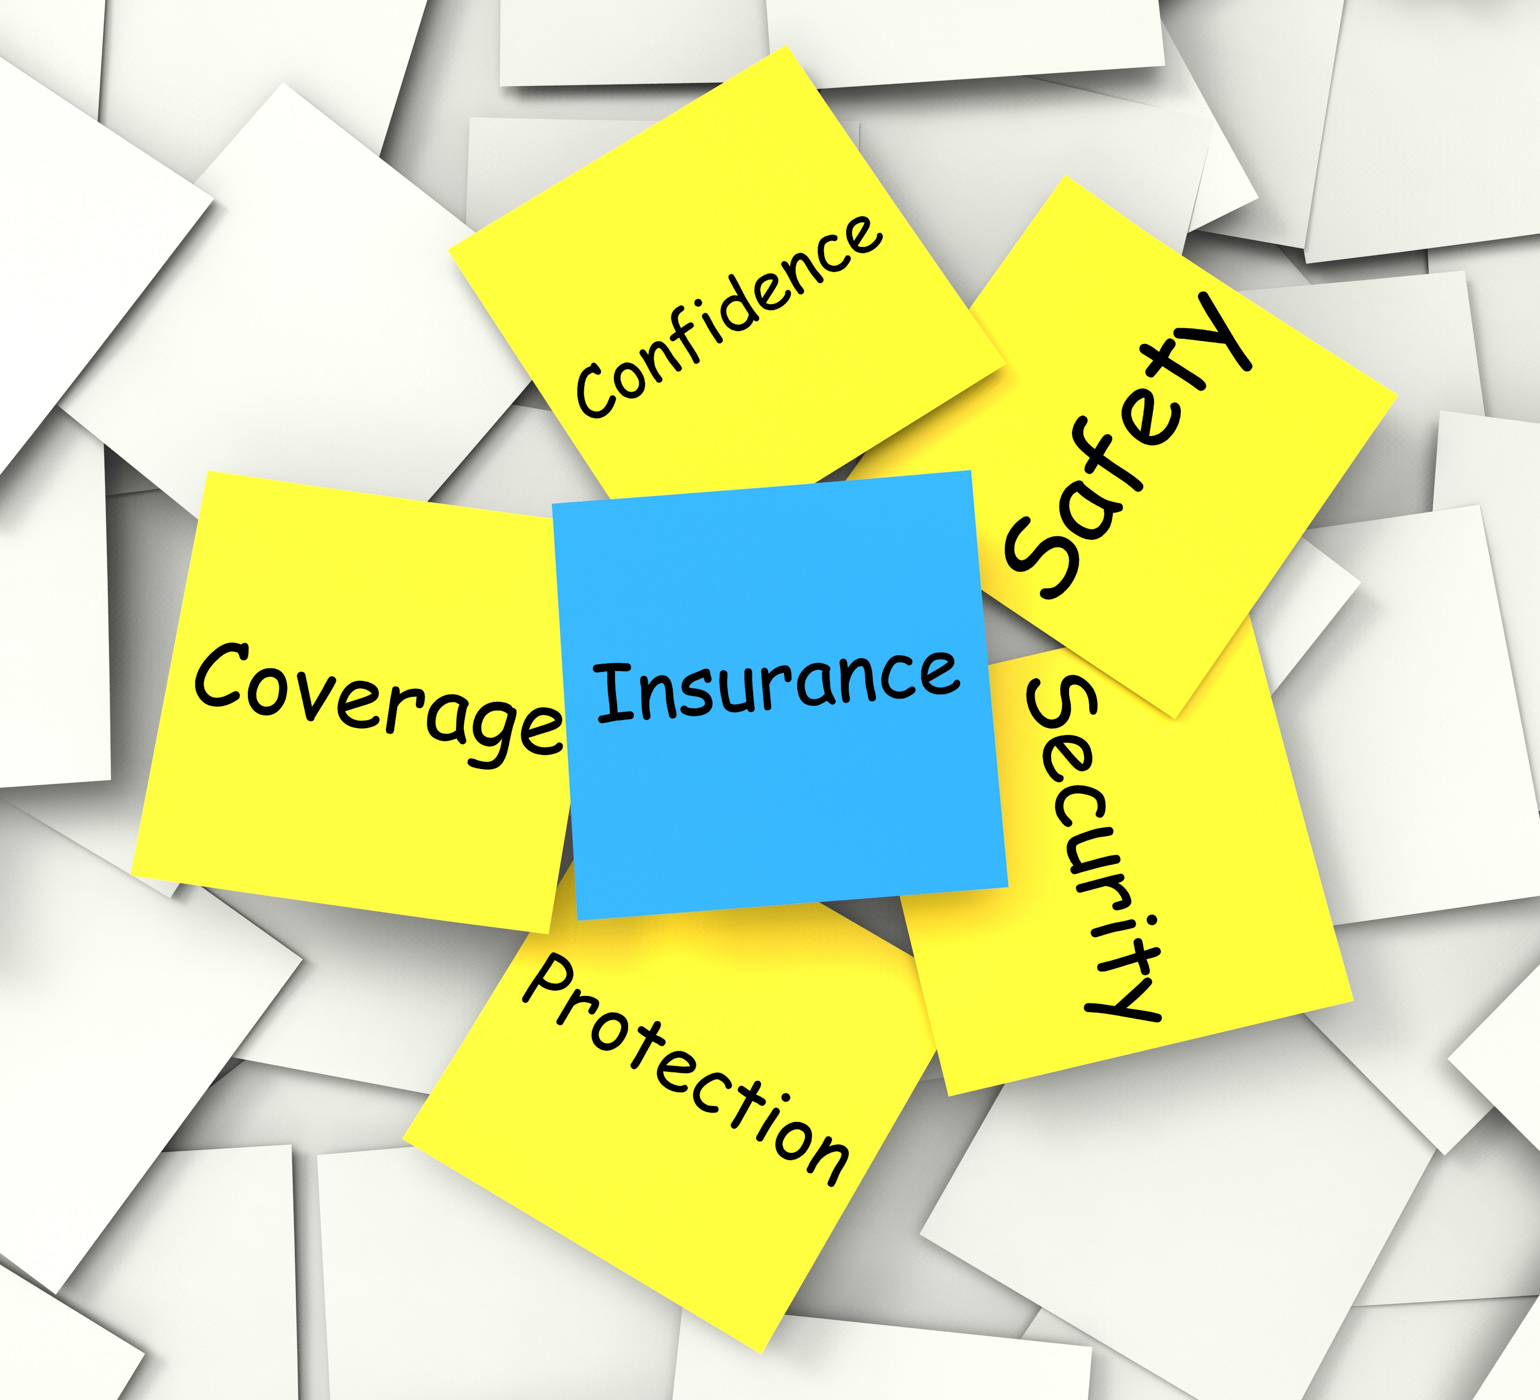 Insurance post-it note shows financial security and coverage photo